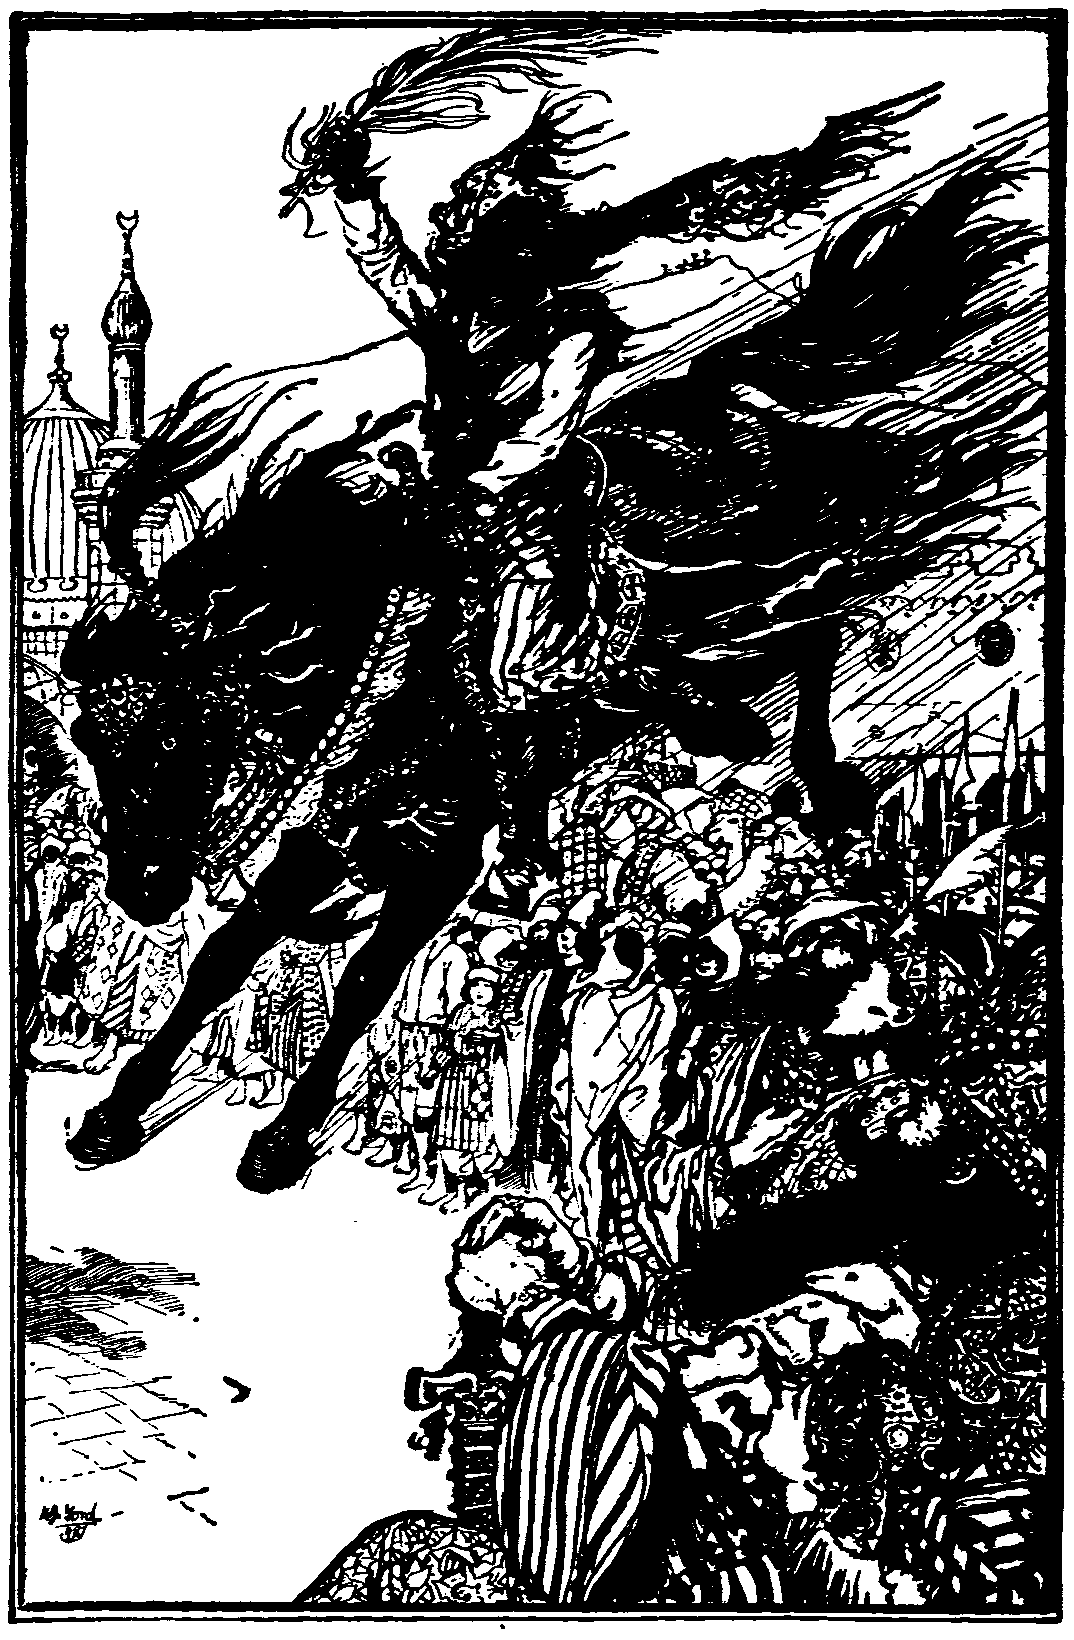 [Illustration] from The Arabian Nights by Andrew Lang